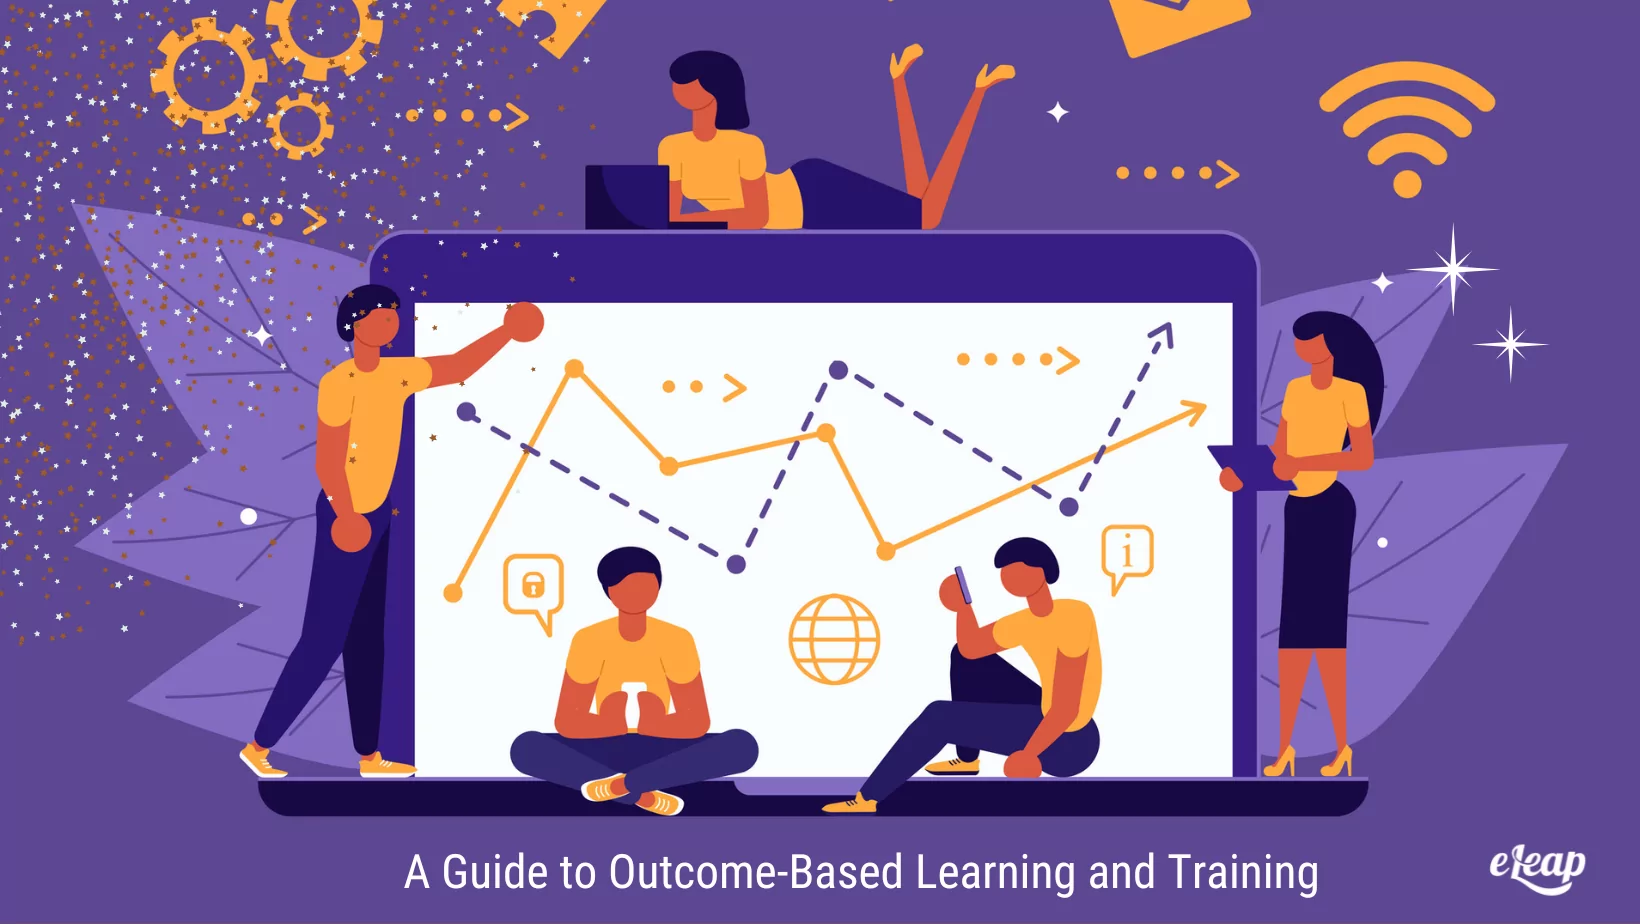 A Guide to Outcome-Based Learning and Training